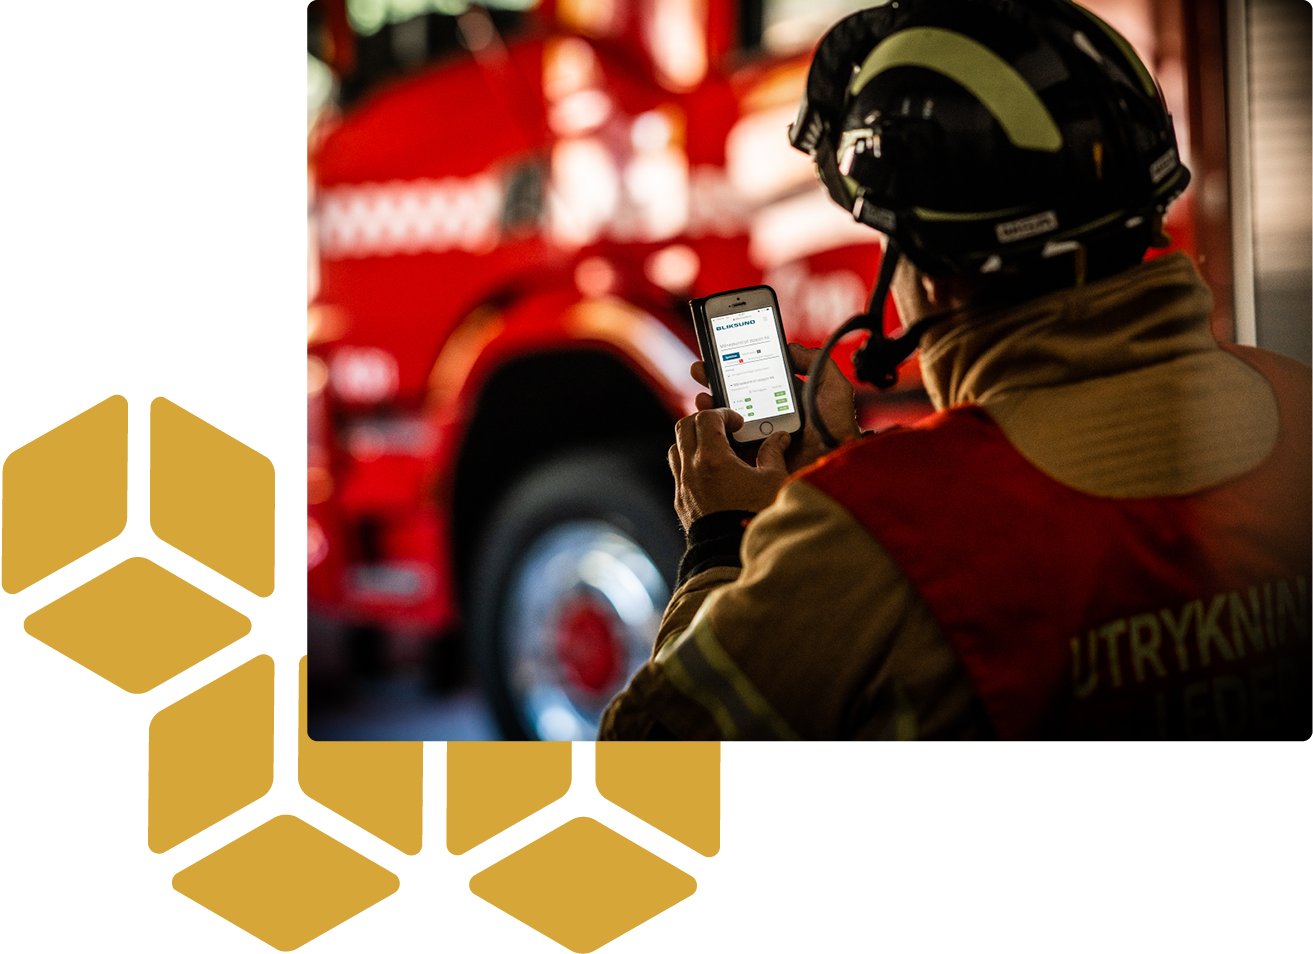 Fire fighter using GRID next to HM government G-Cloud supplier logo